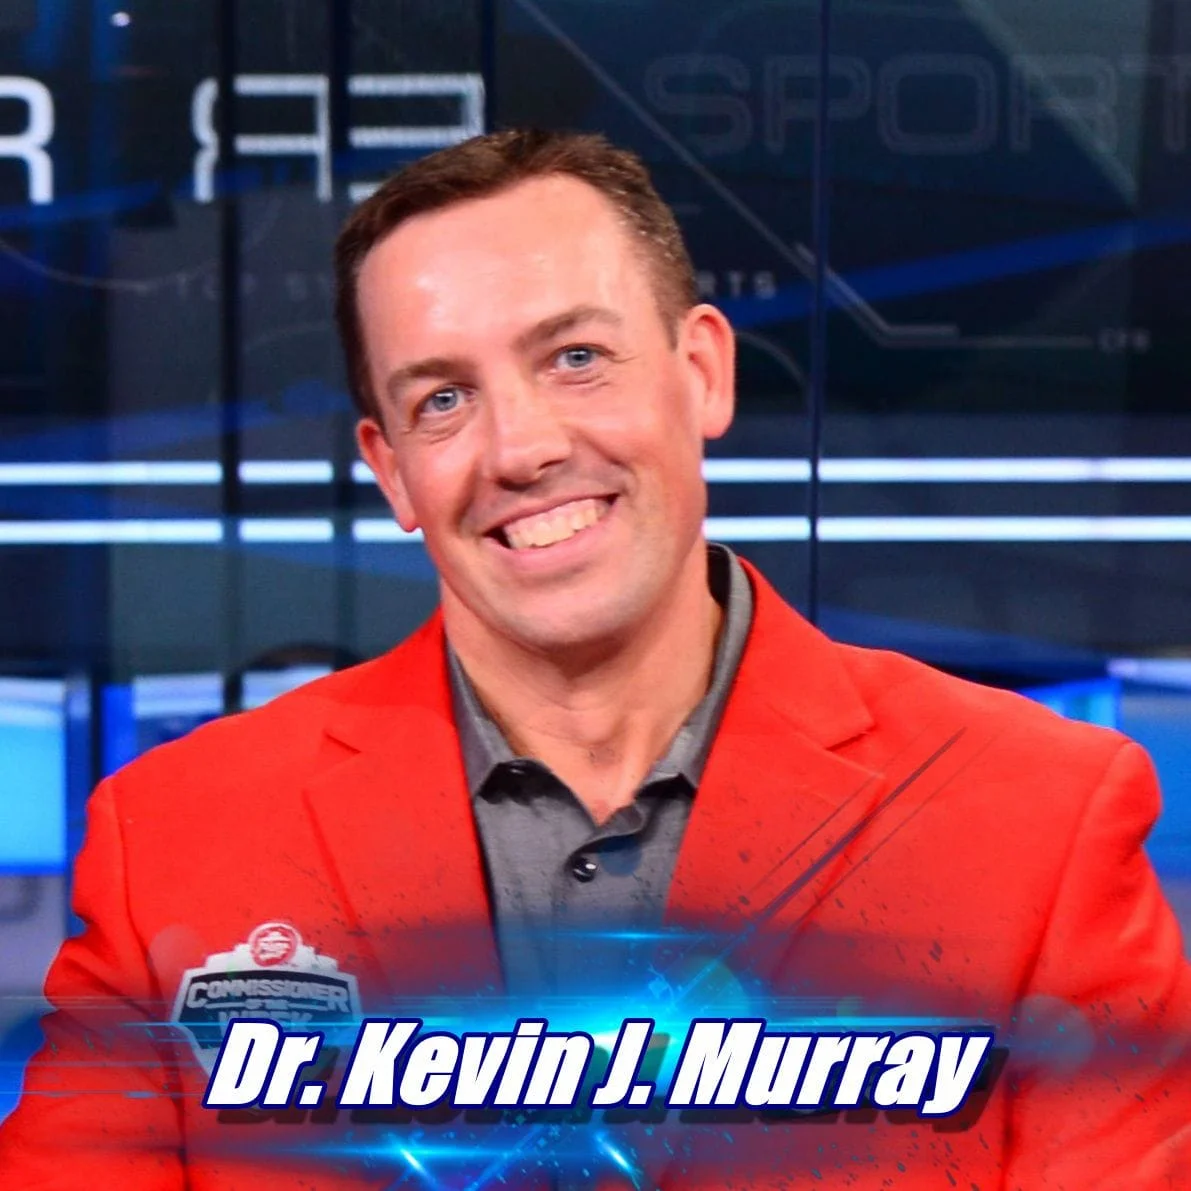 Dr. Kevin J. Murray